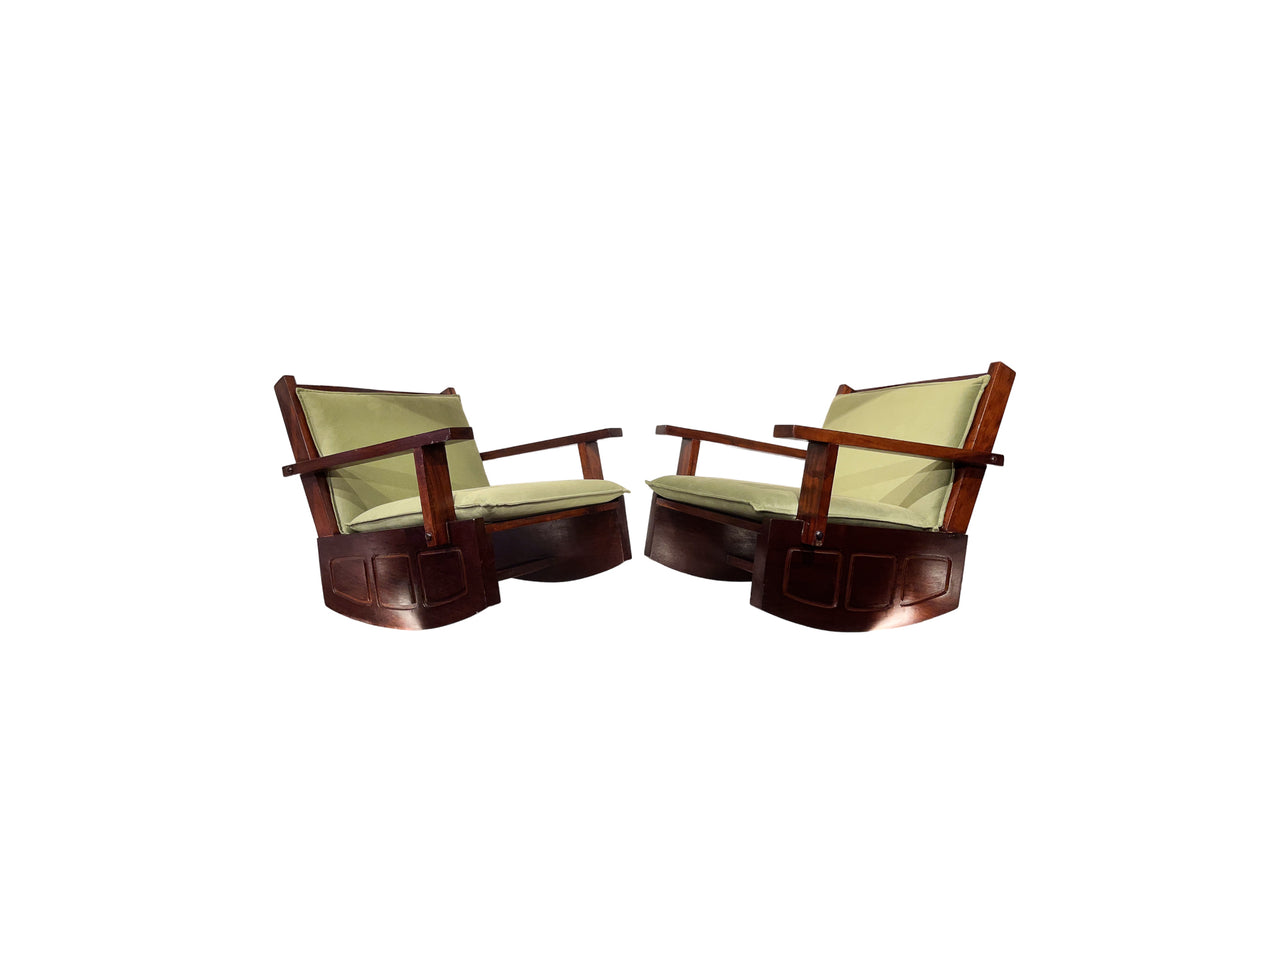 Pair of Rocking Chairs with Sculpted Base, Unknown, c. 1950s - Lot 22